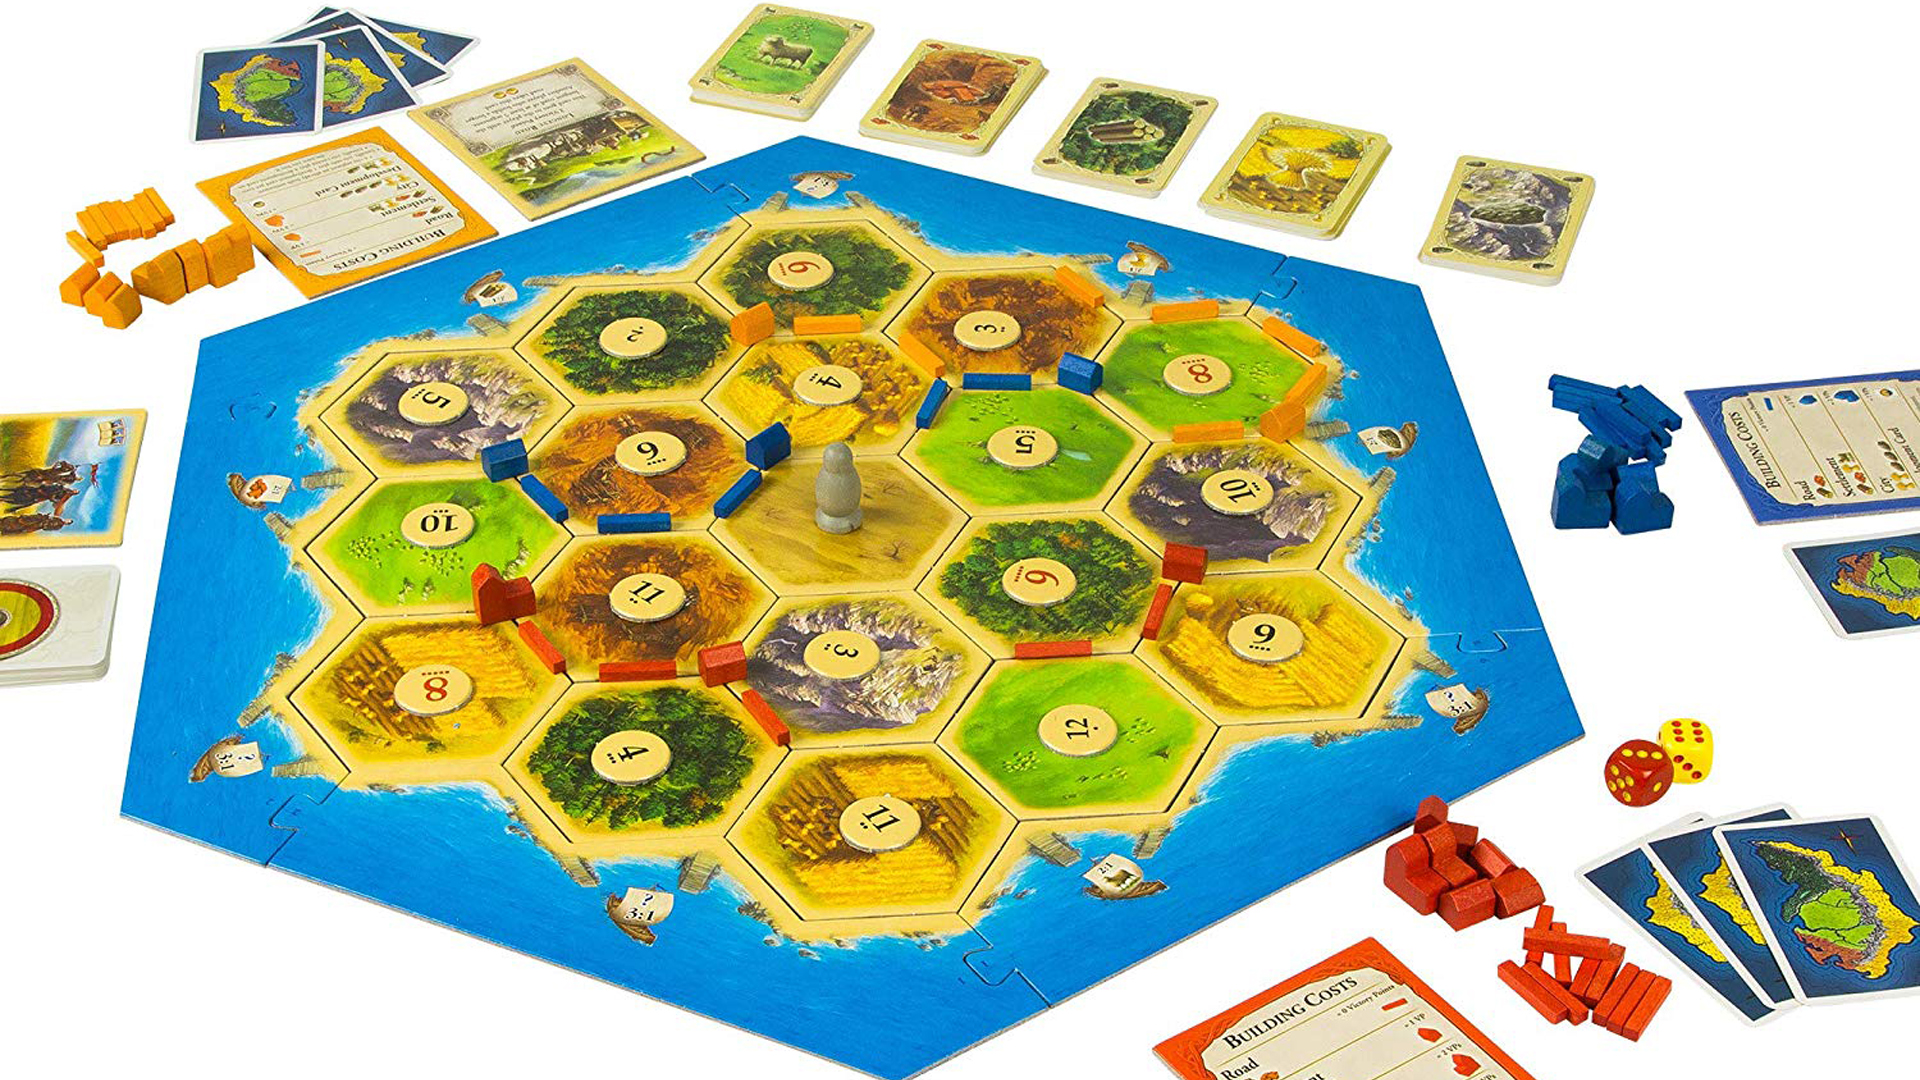 CATAN SPARE REPLACE RESOURCE CARD or ADD ON CARDS board game settlers of catan 